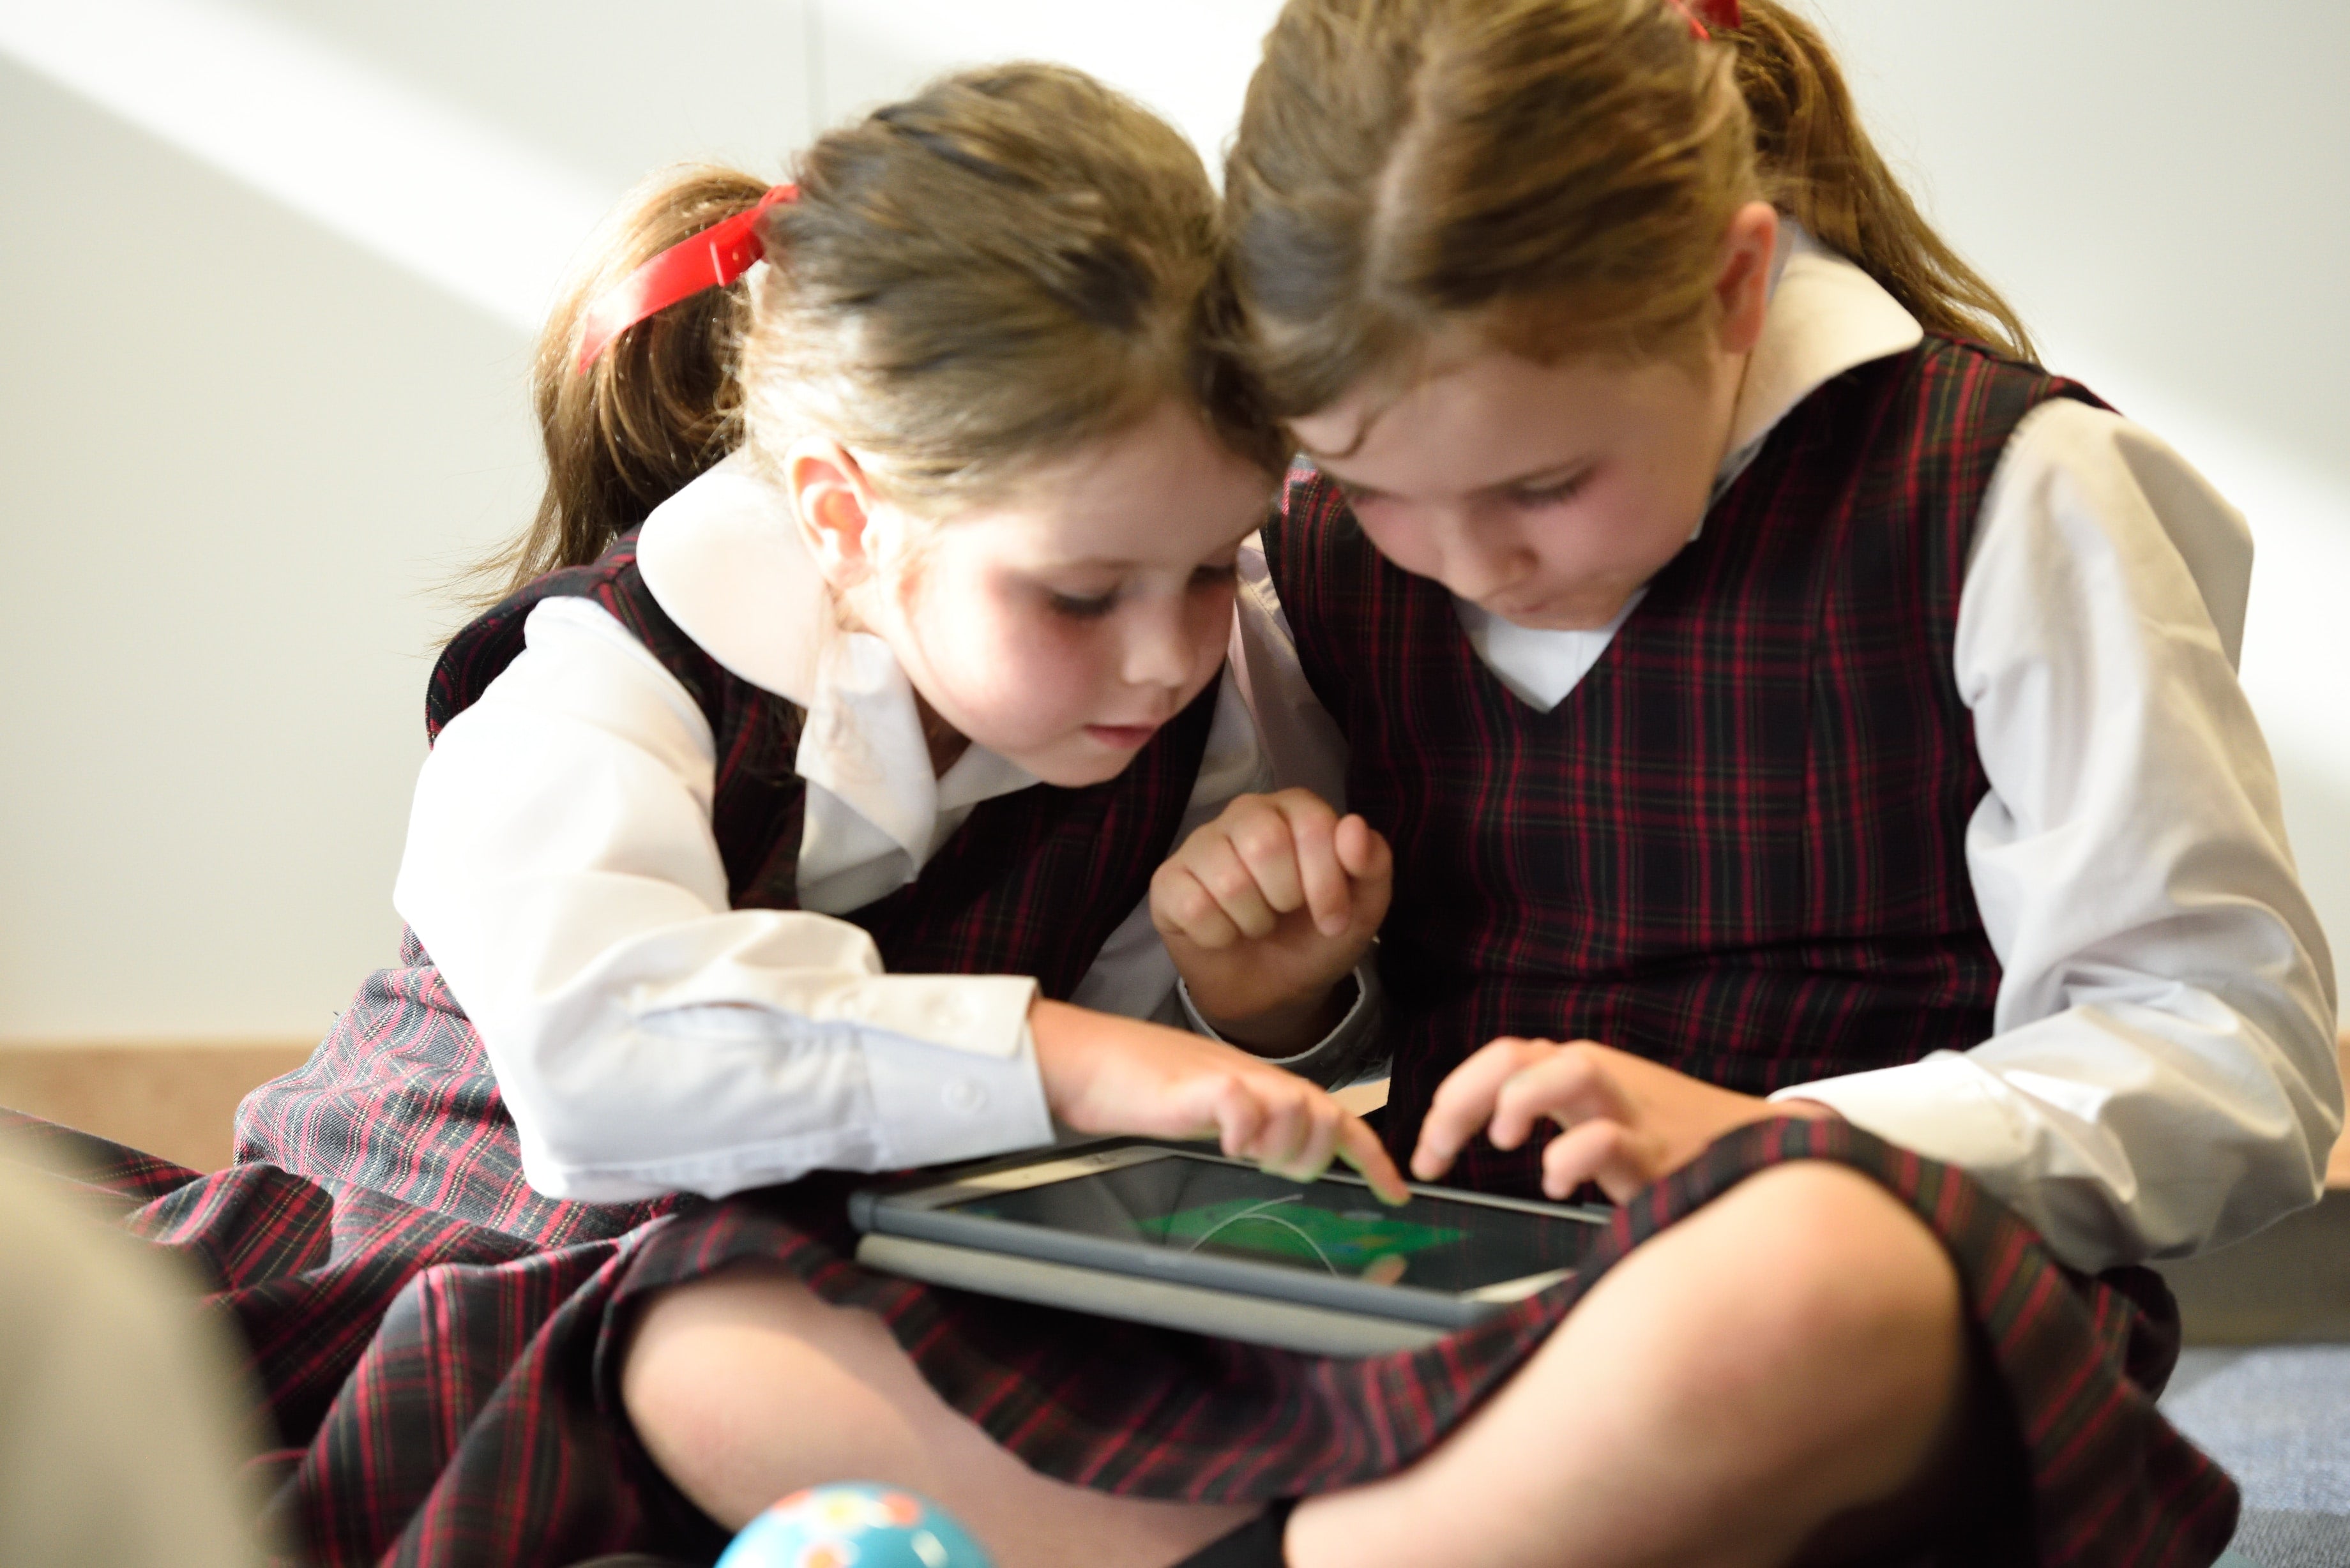 Two Sisters Playing on a Tablet Together - Sibling Photo Idea